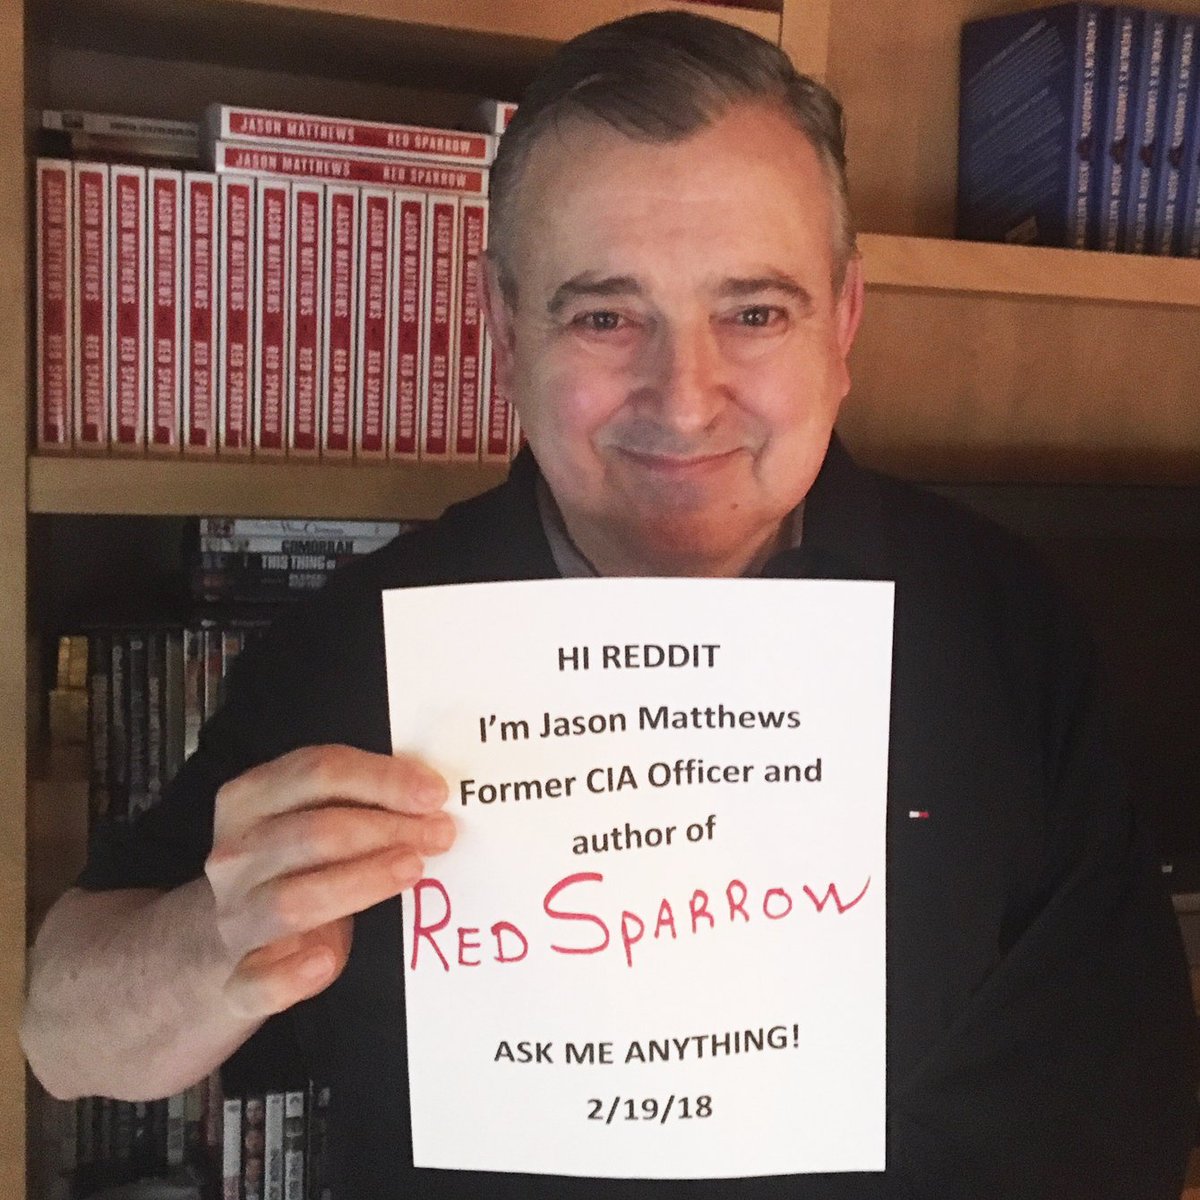 Red Sparrow on Twitter: Red Sparrow author and former CIA operative Jason Matthews Join his Reddit now: https://t.co/AIx3Lr8qeU https://t.co/8NPcDbSb02" / X